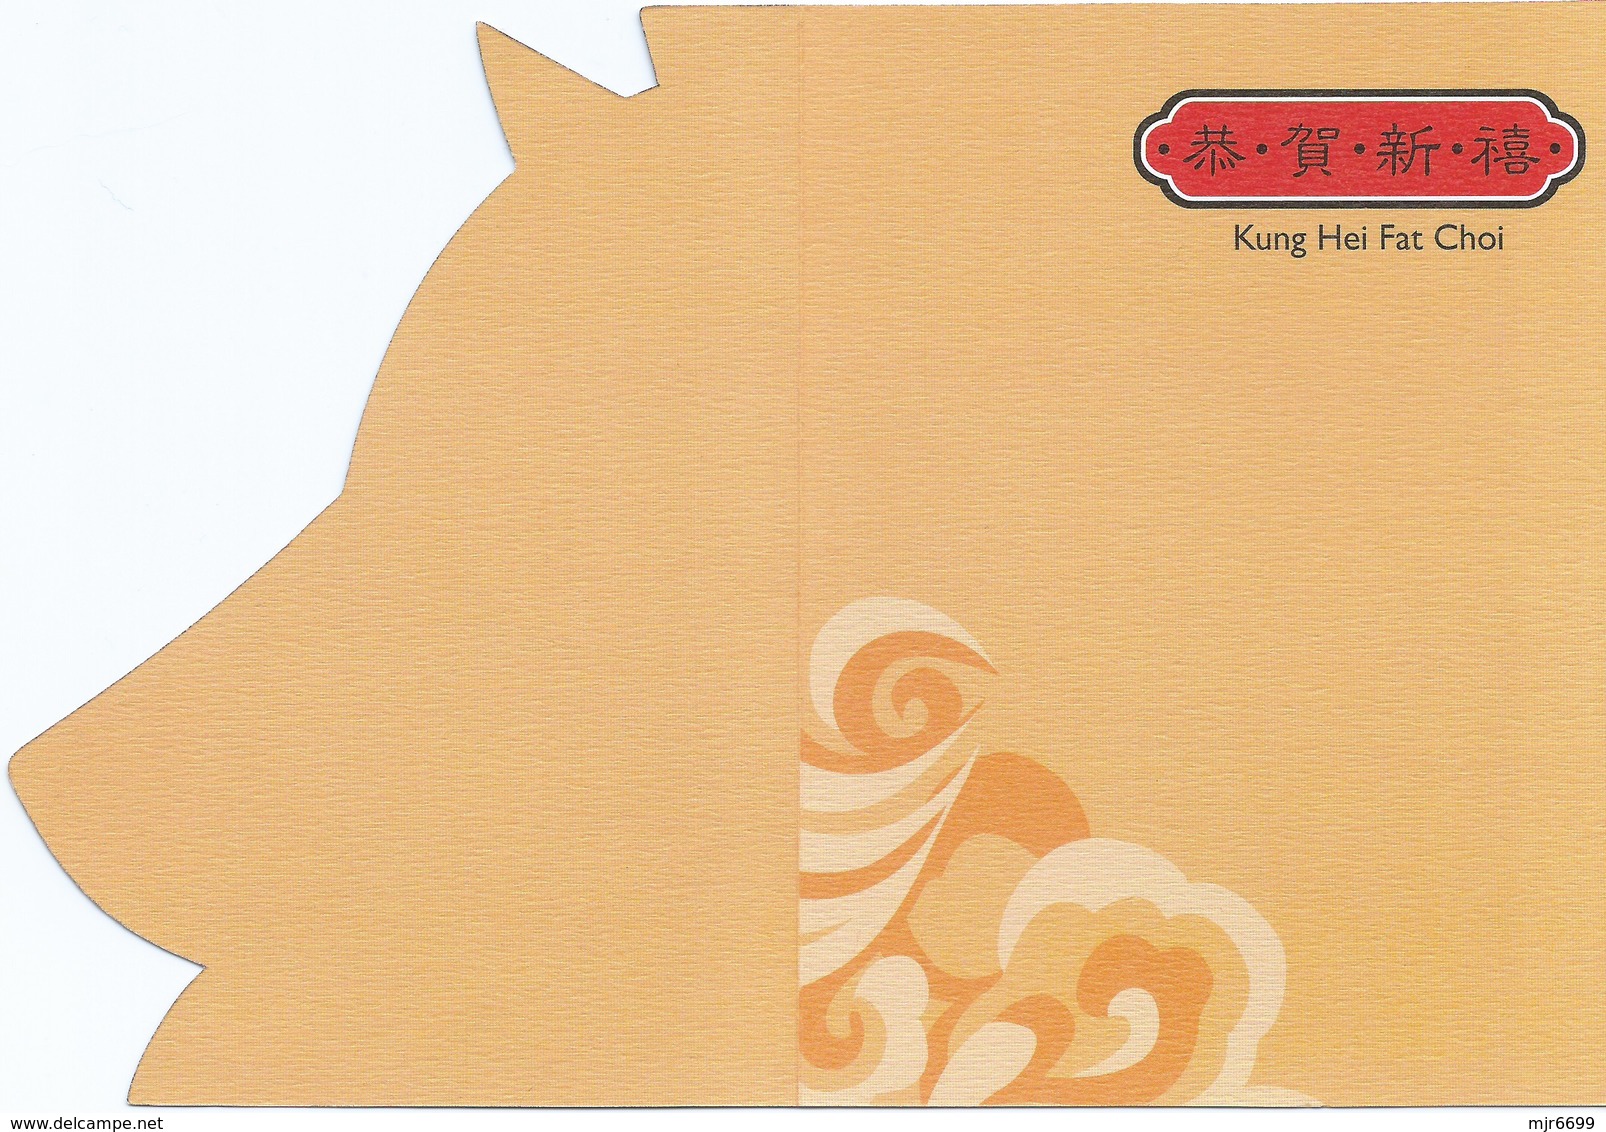 MACAU 2005 LUNAR YEAR OF THE DOG GREETING CARD & POSTAGE PAID COVER FIRST DAY USAGE WITH COLOANE POST CDS - Ganzsachen